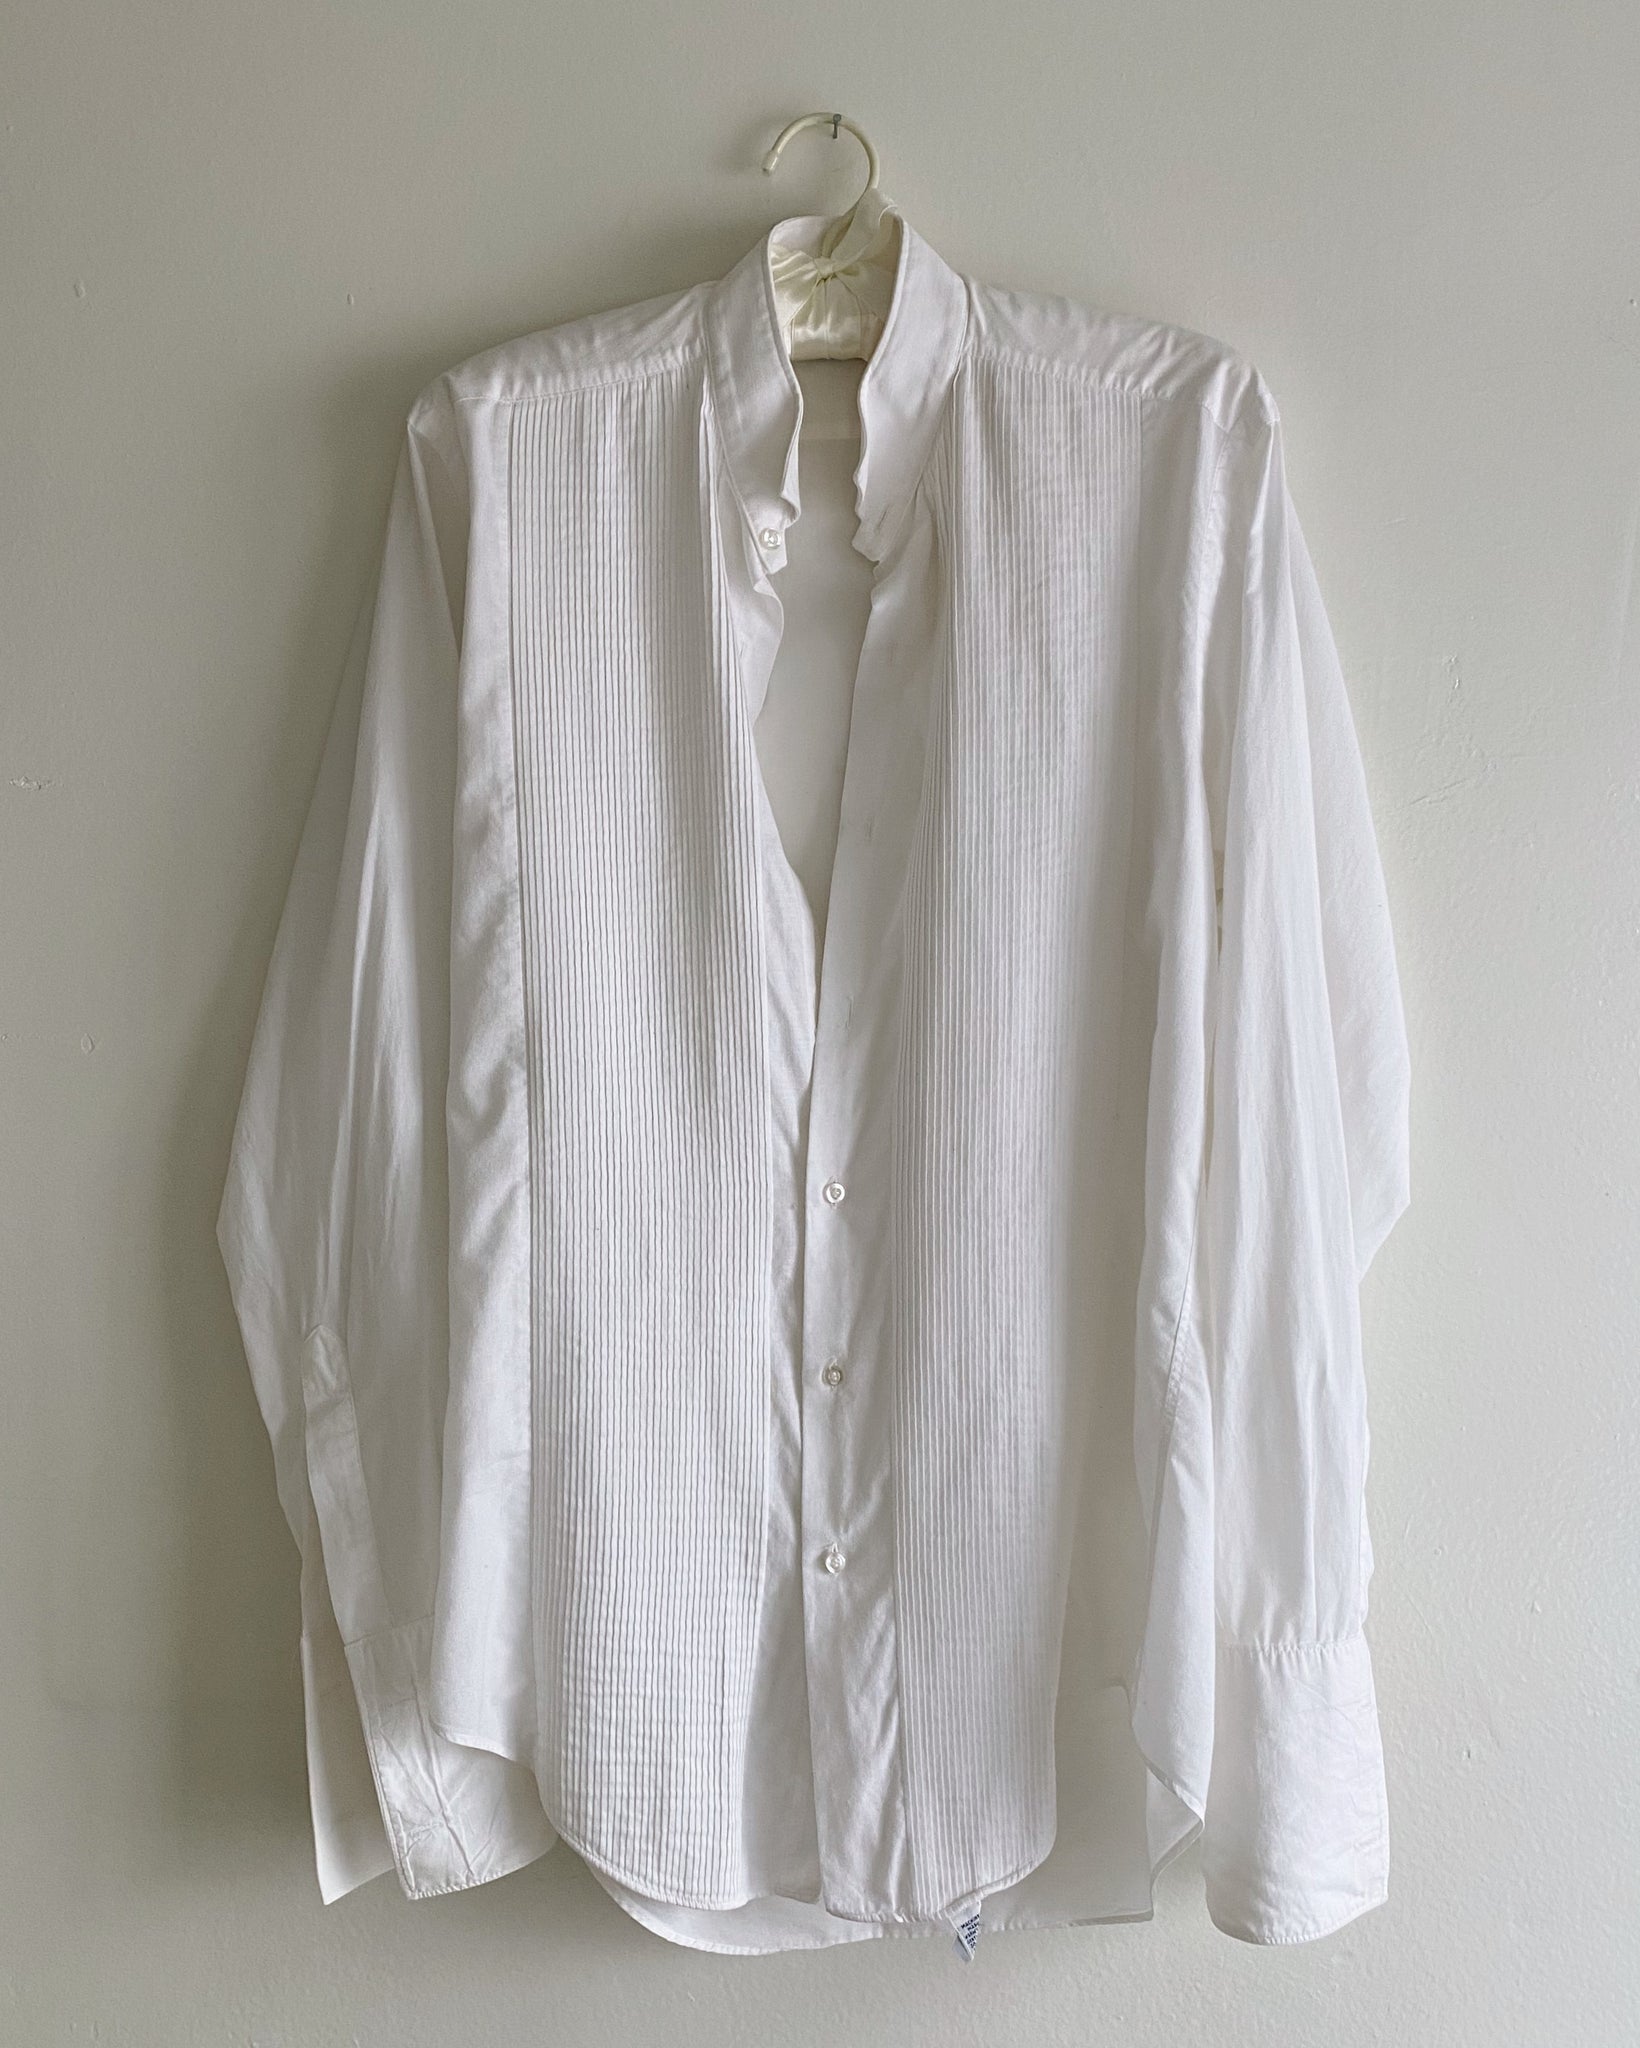 YSL Tuxedo Shirt – The Gentle Witch